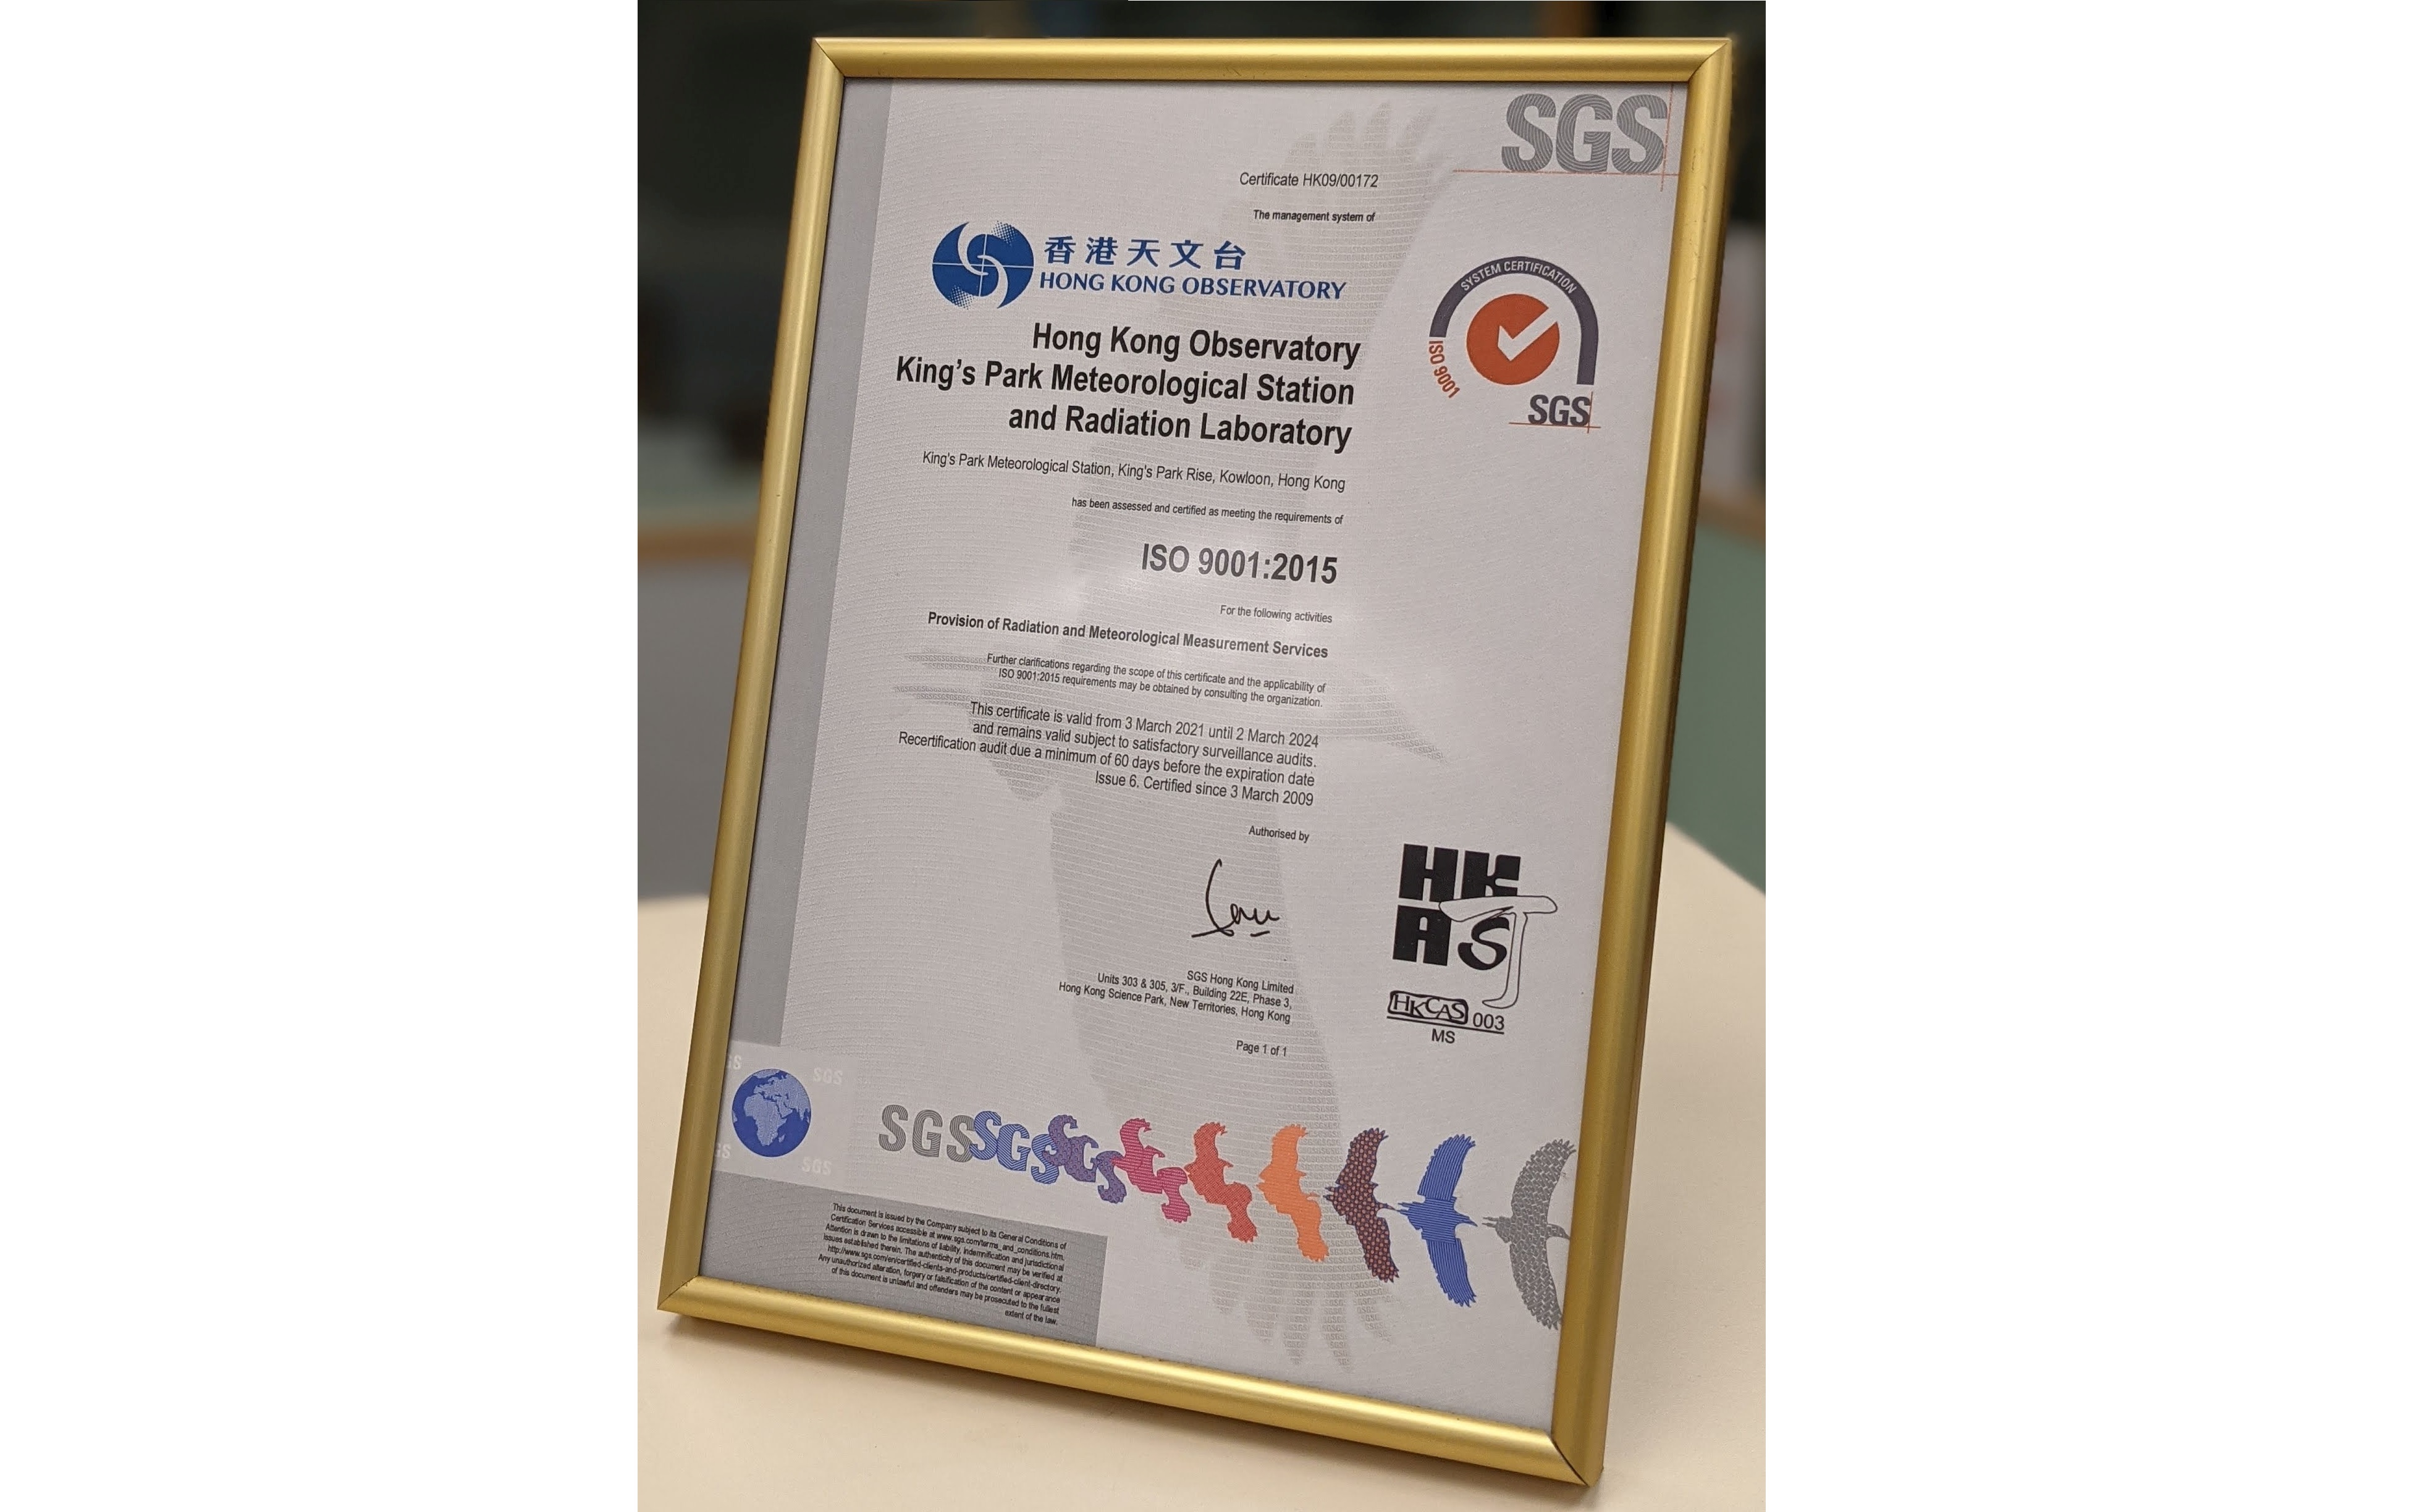 The ISO 9001:2015 certificate awarded to King’s Park Meteorological Station and the Observatory’s Radiation Laboratory